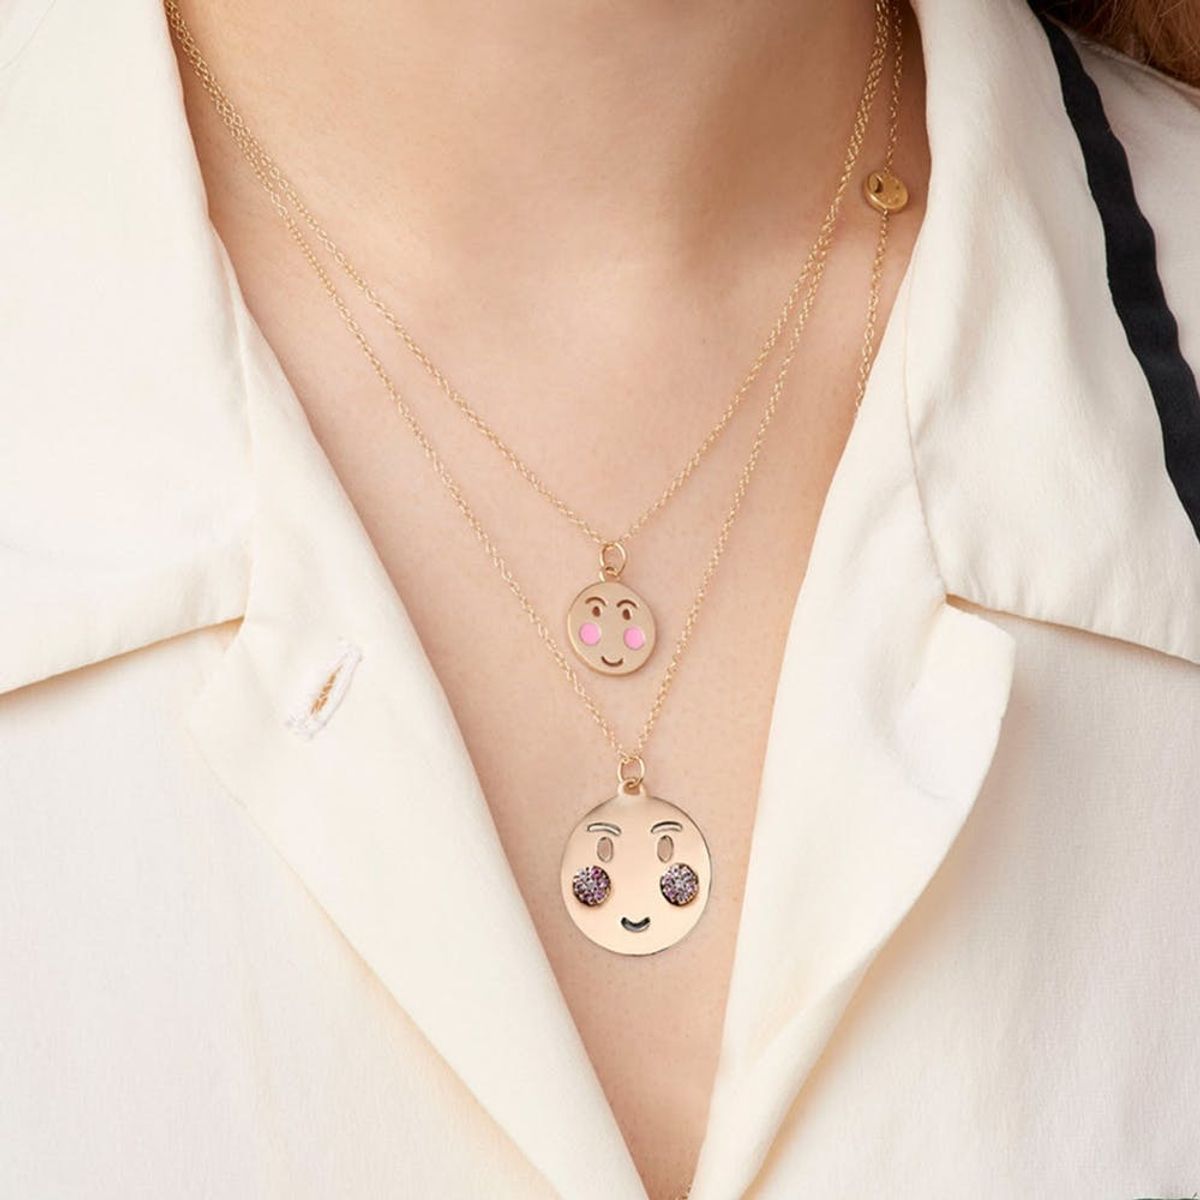 Where to Find That Emoji Necklace That Blake Lively Loves